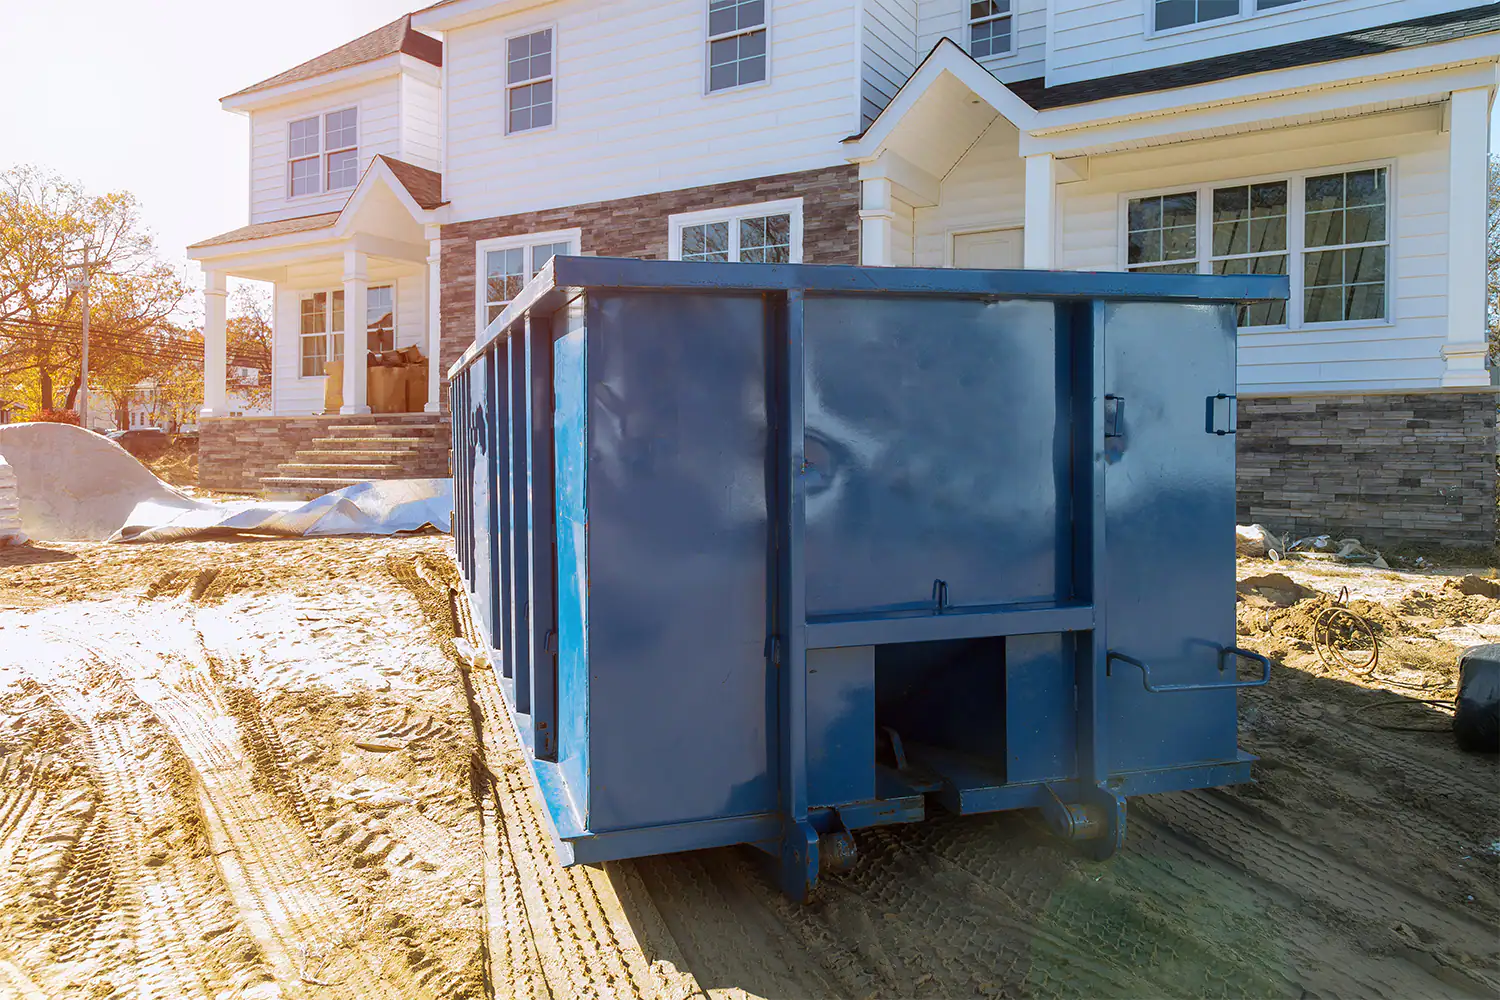 Dumpster-at-house